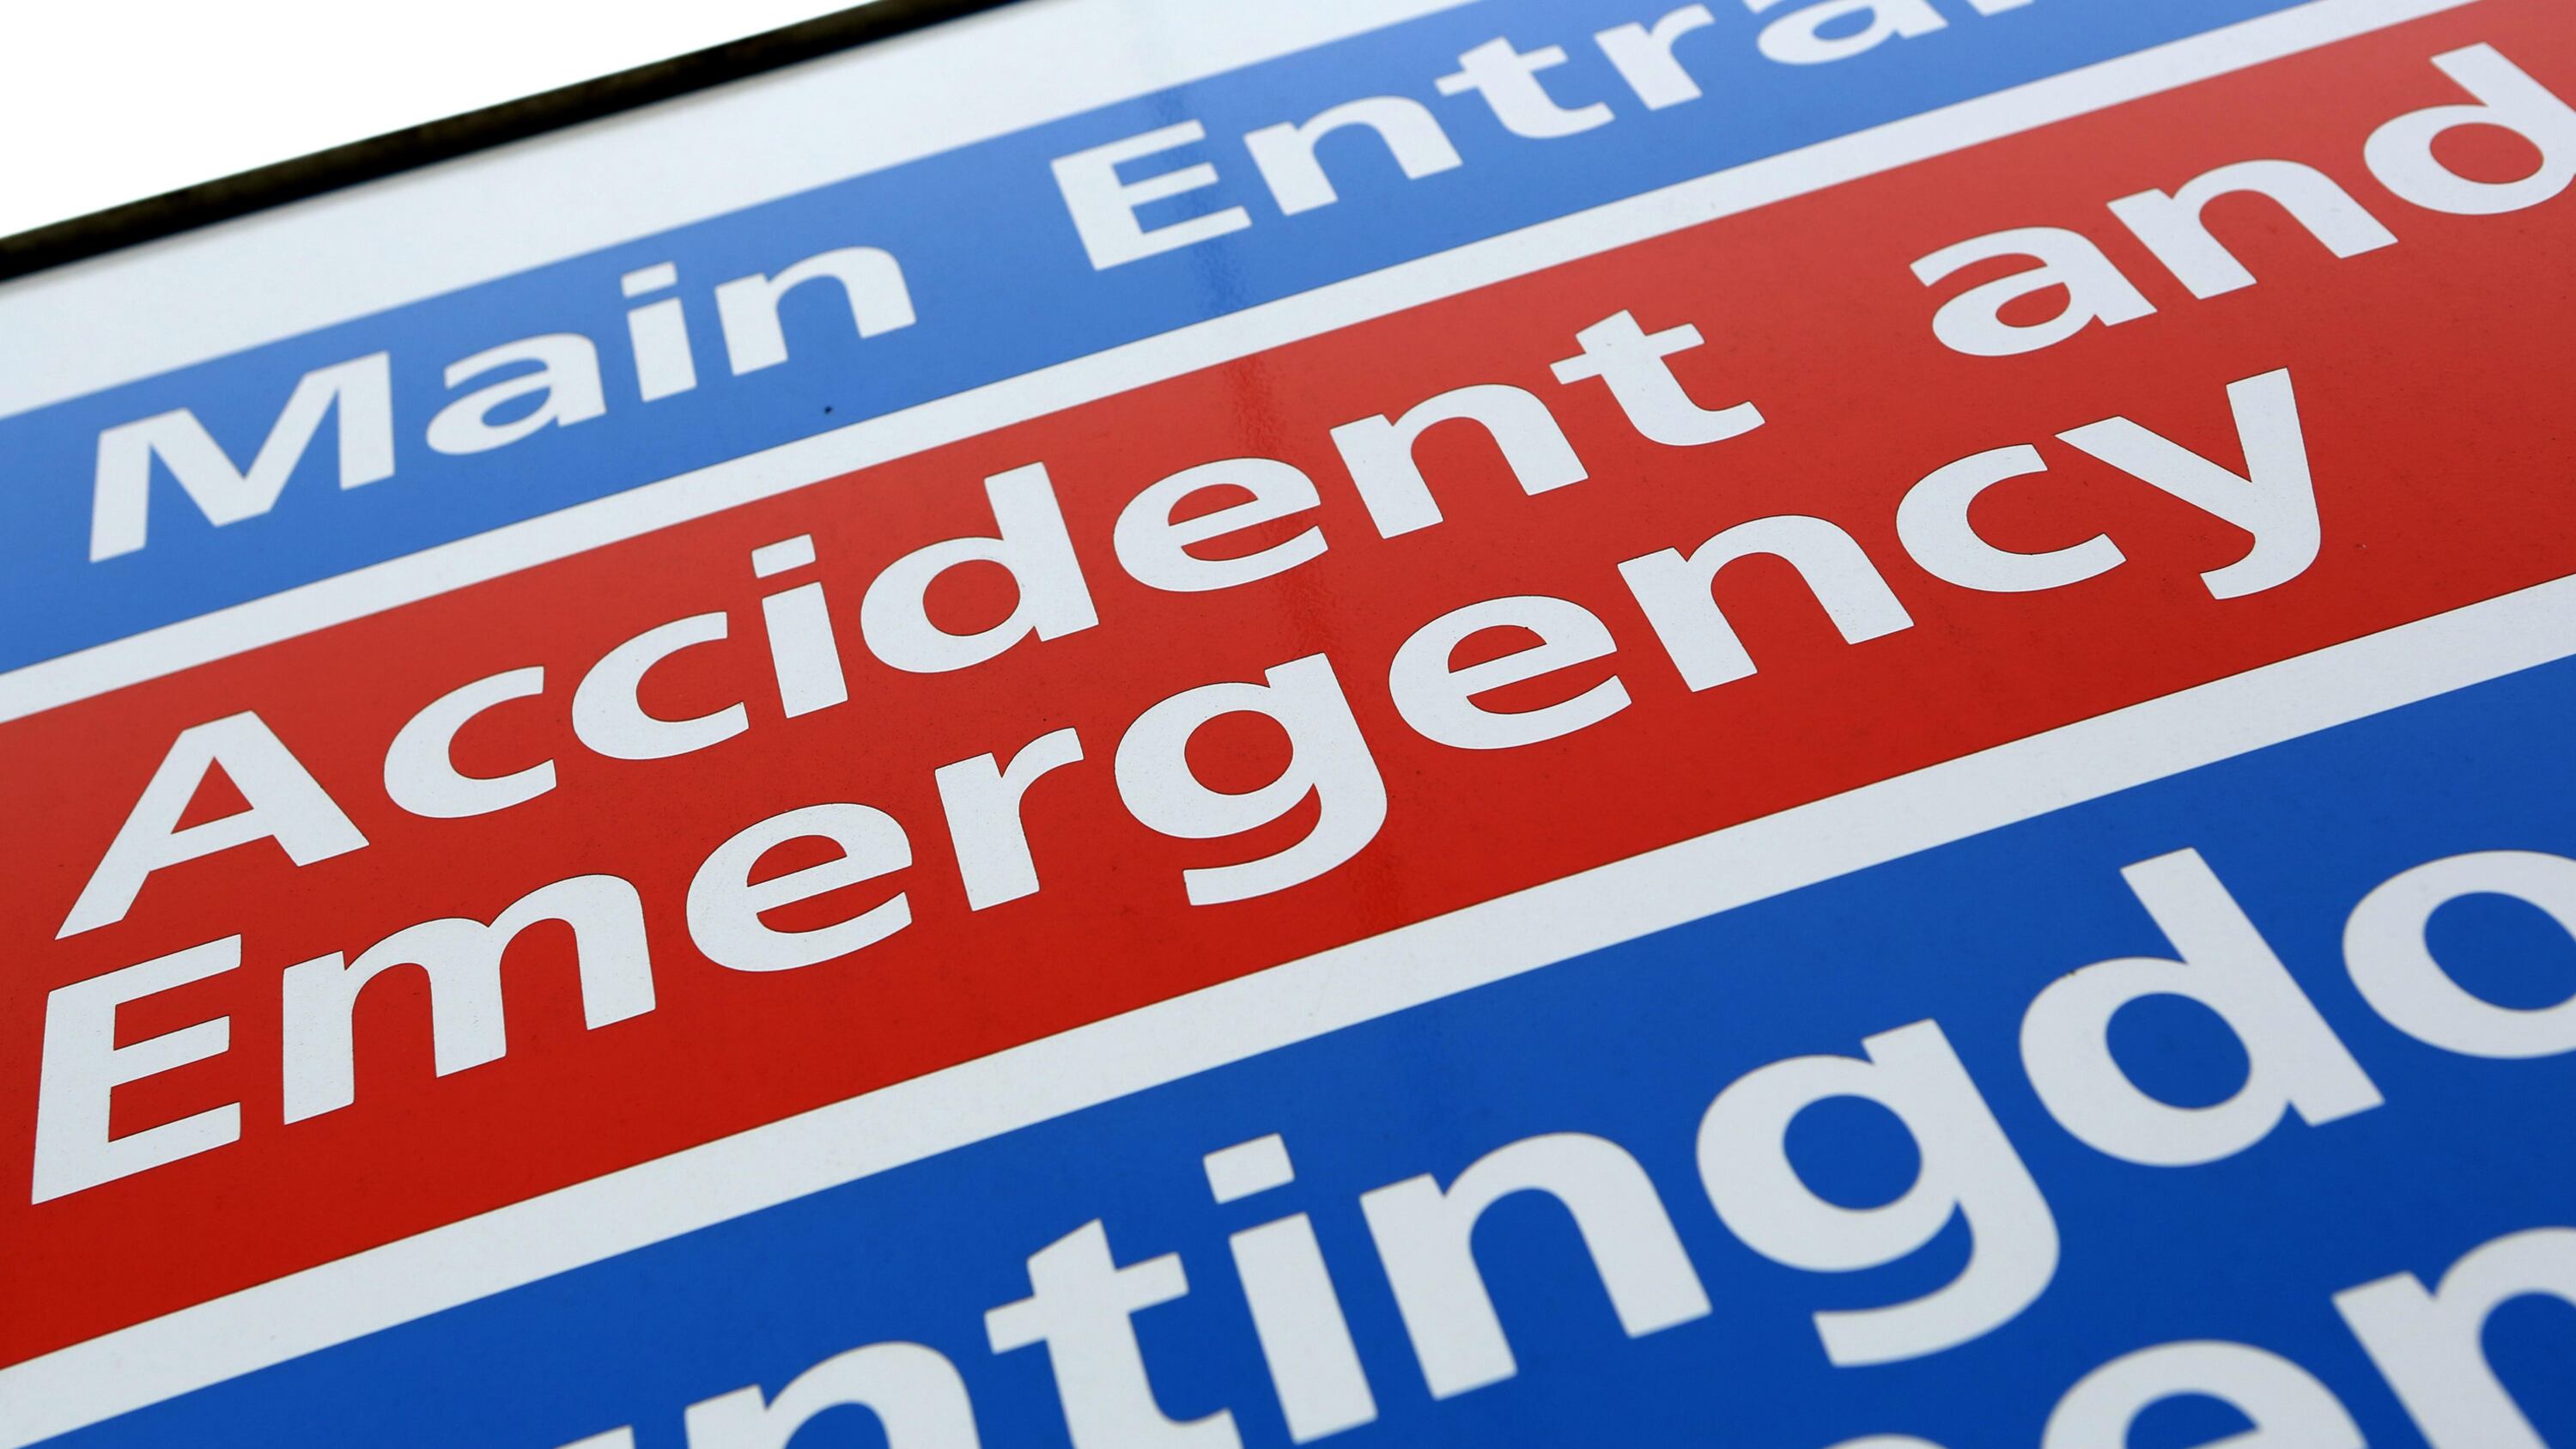 A record number of patients faced 12-hour A&E waits last year, figured showed